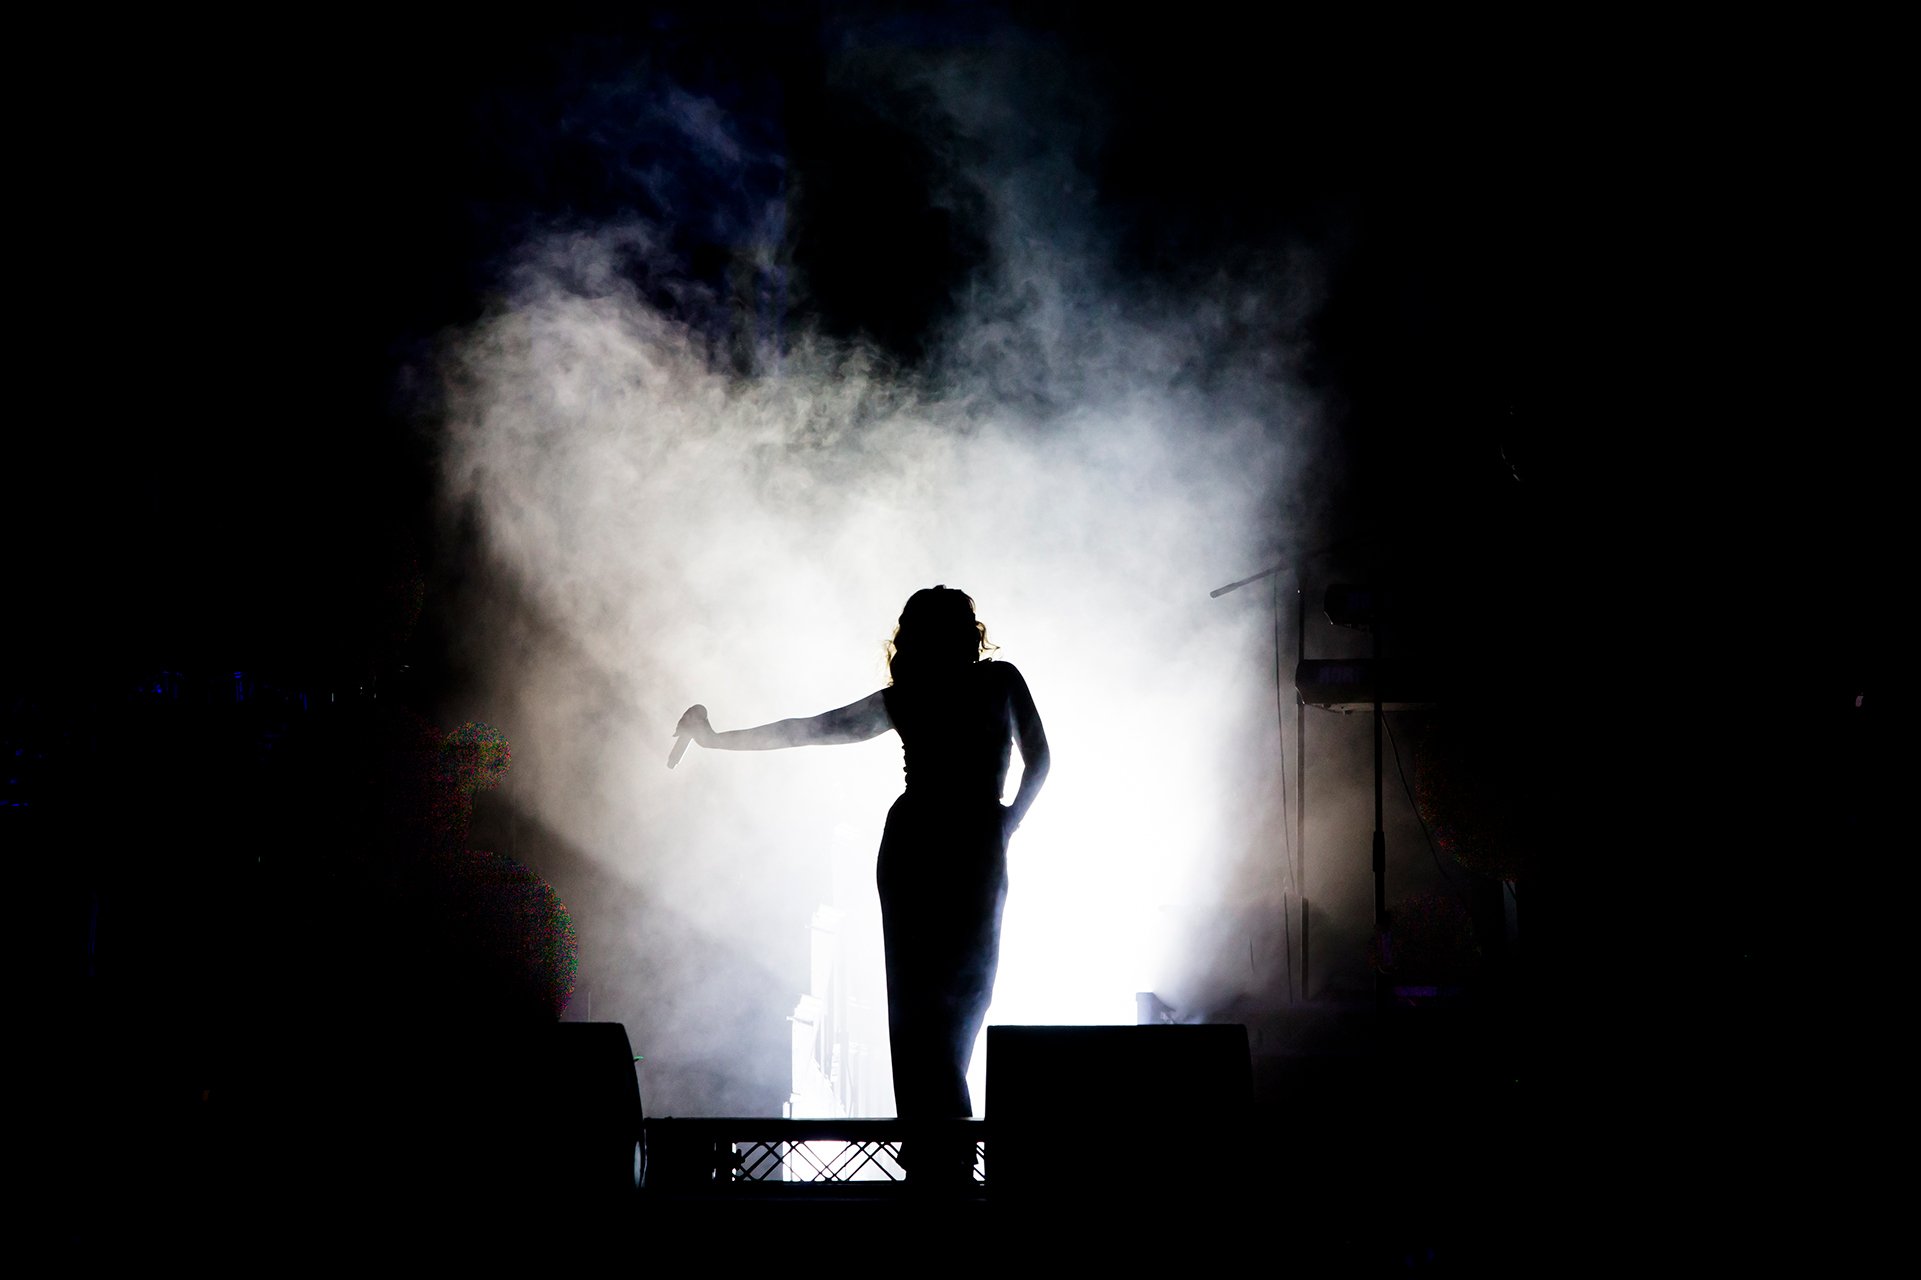  silhouette of jessica mauboy on stage brisbane kirsten cox photographer events 